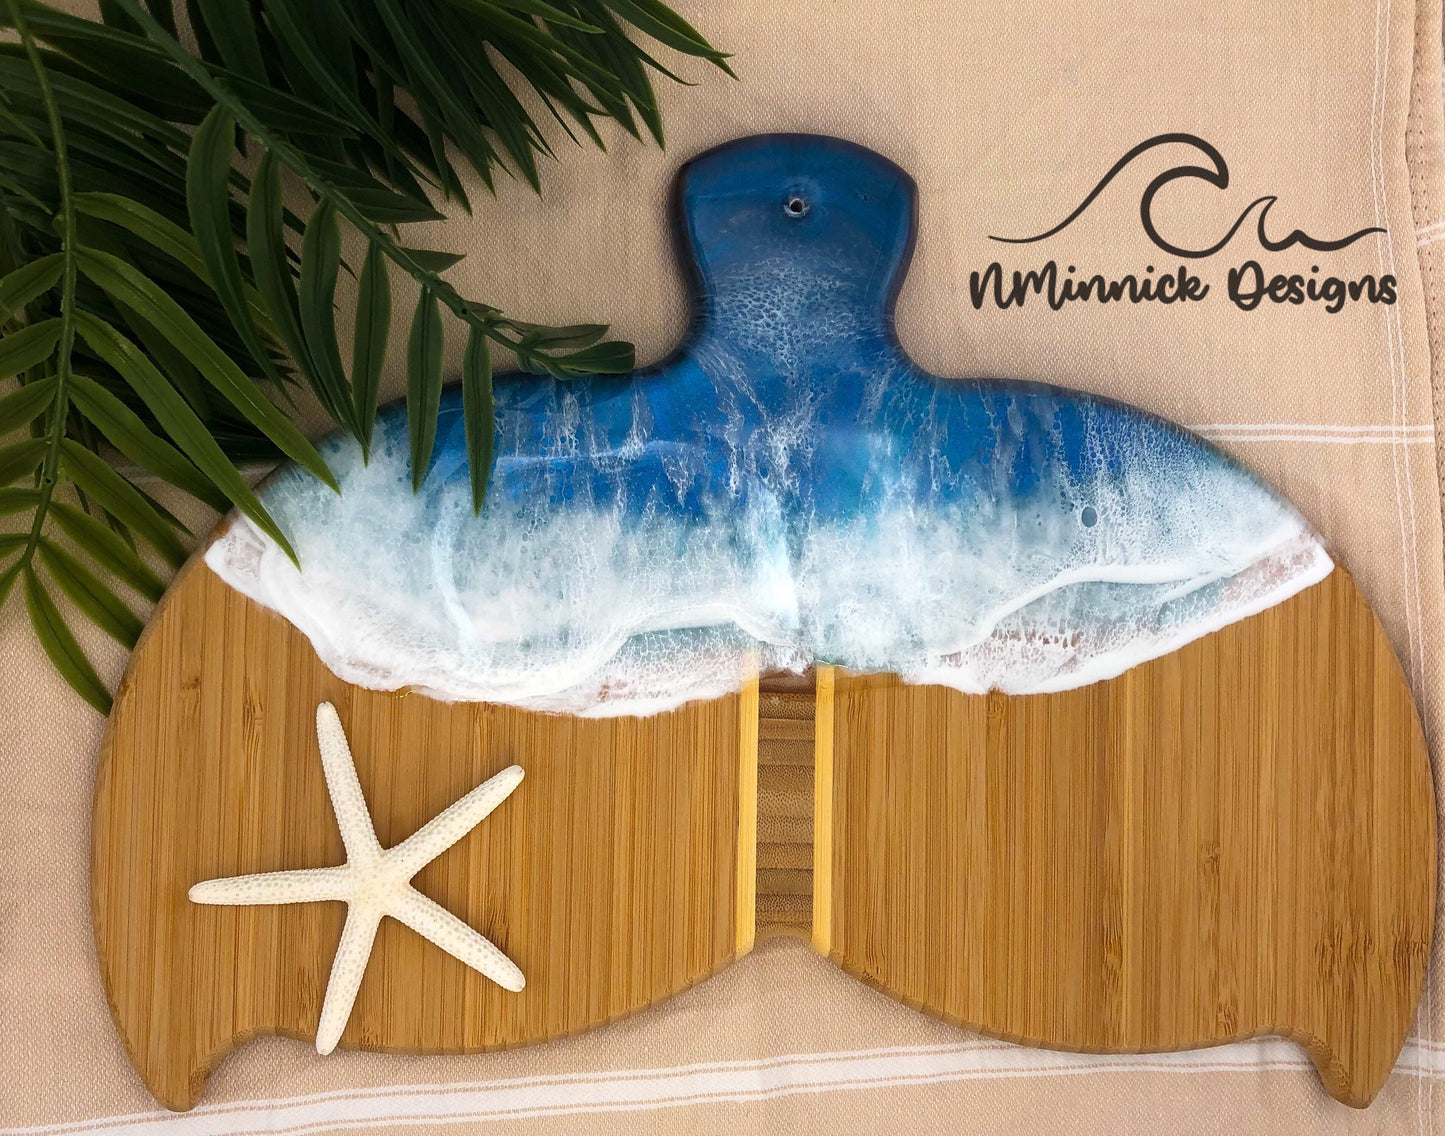 14.5 inch x 10.5 inch bamboo serving board in the shape of a whale fin with a dark navy blue and medium blue ocean wave pattern on the top half of the board.